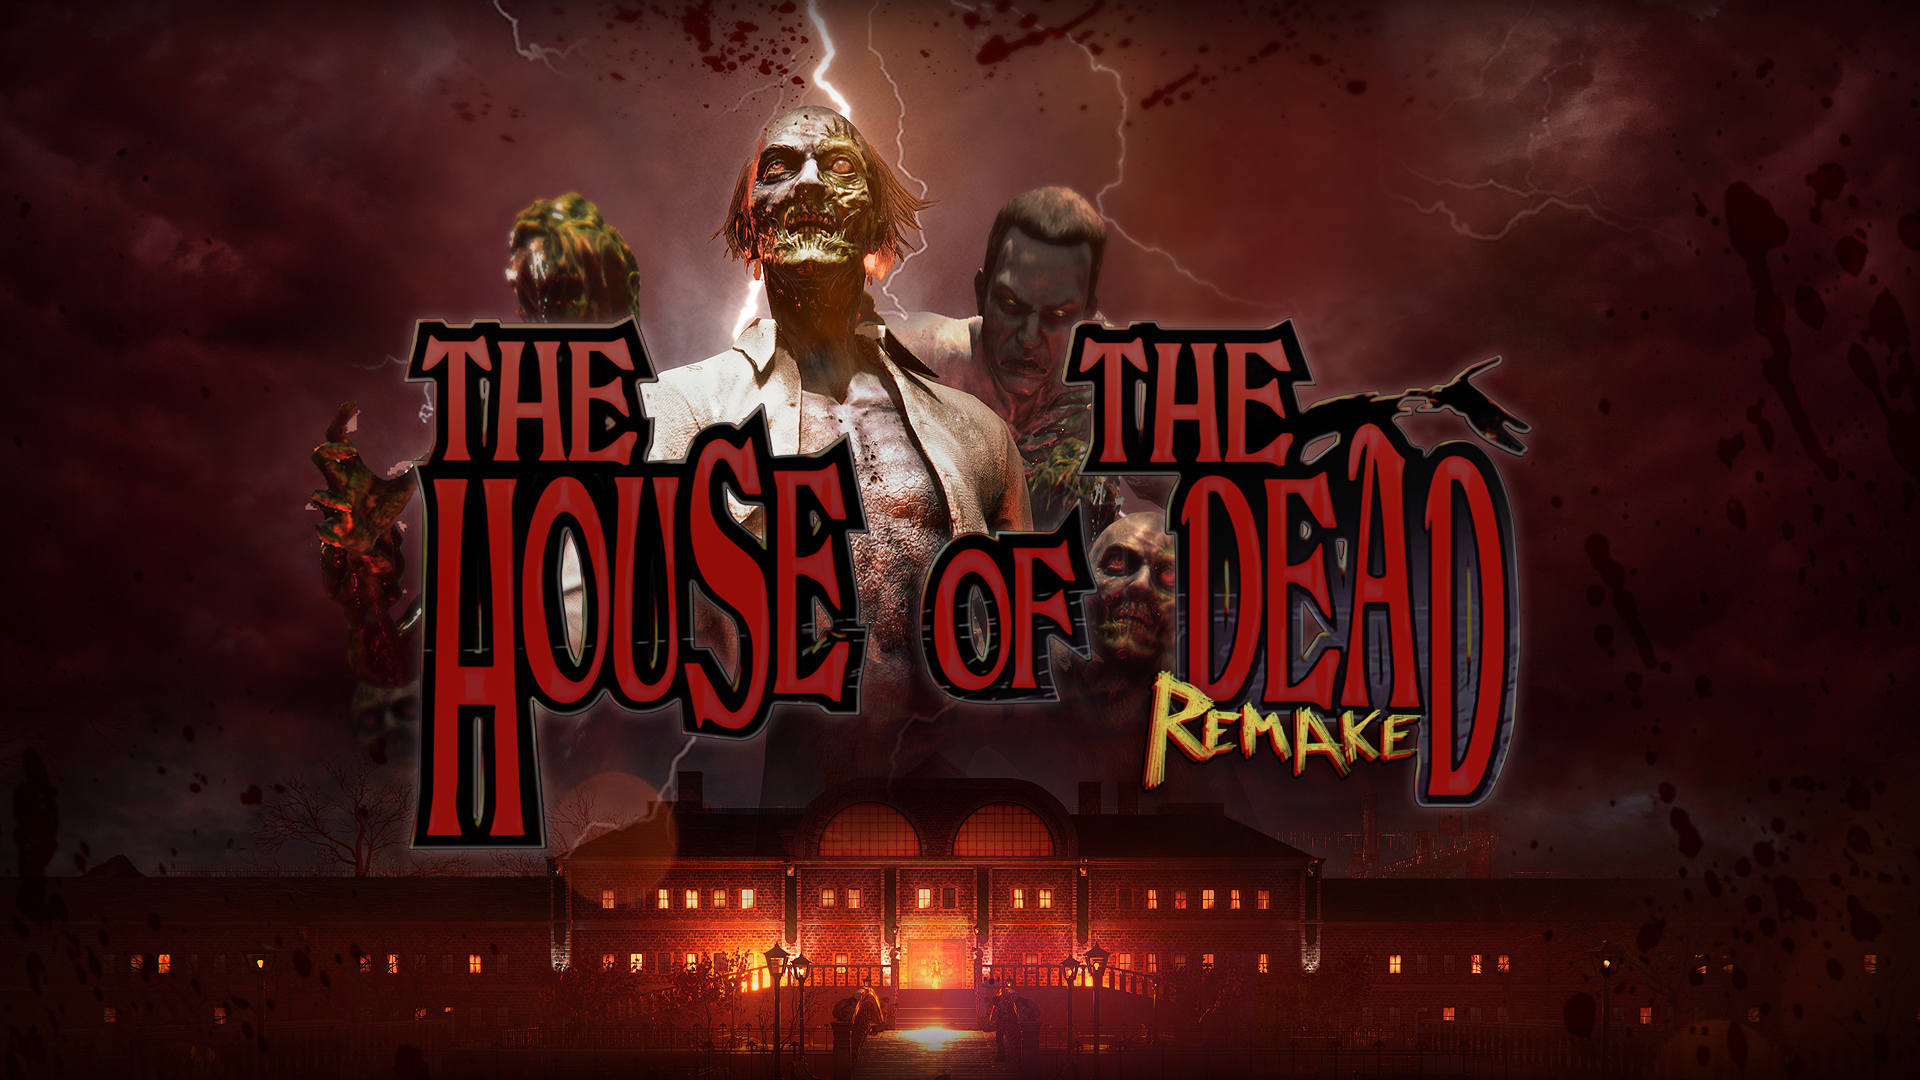 When does The House of the Dead: Remake release?